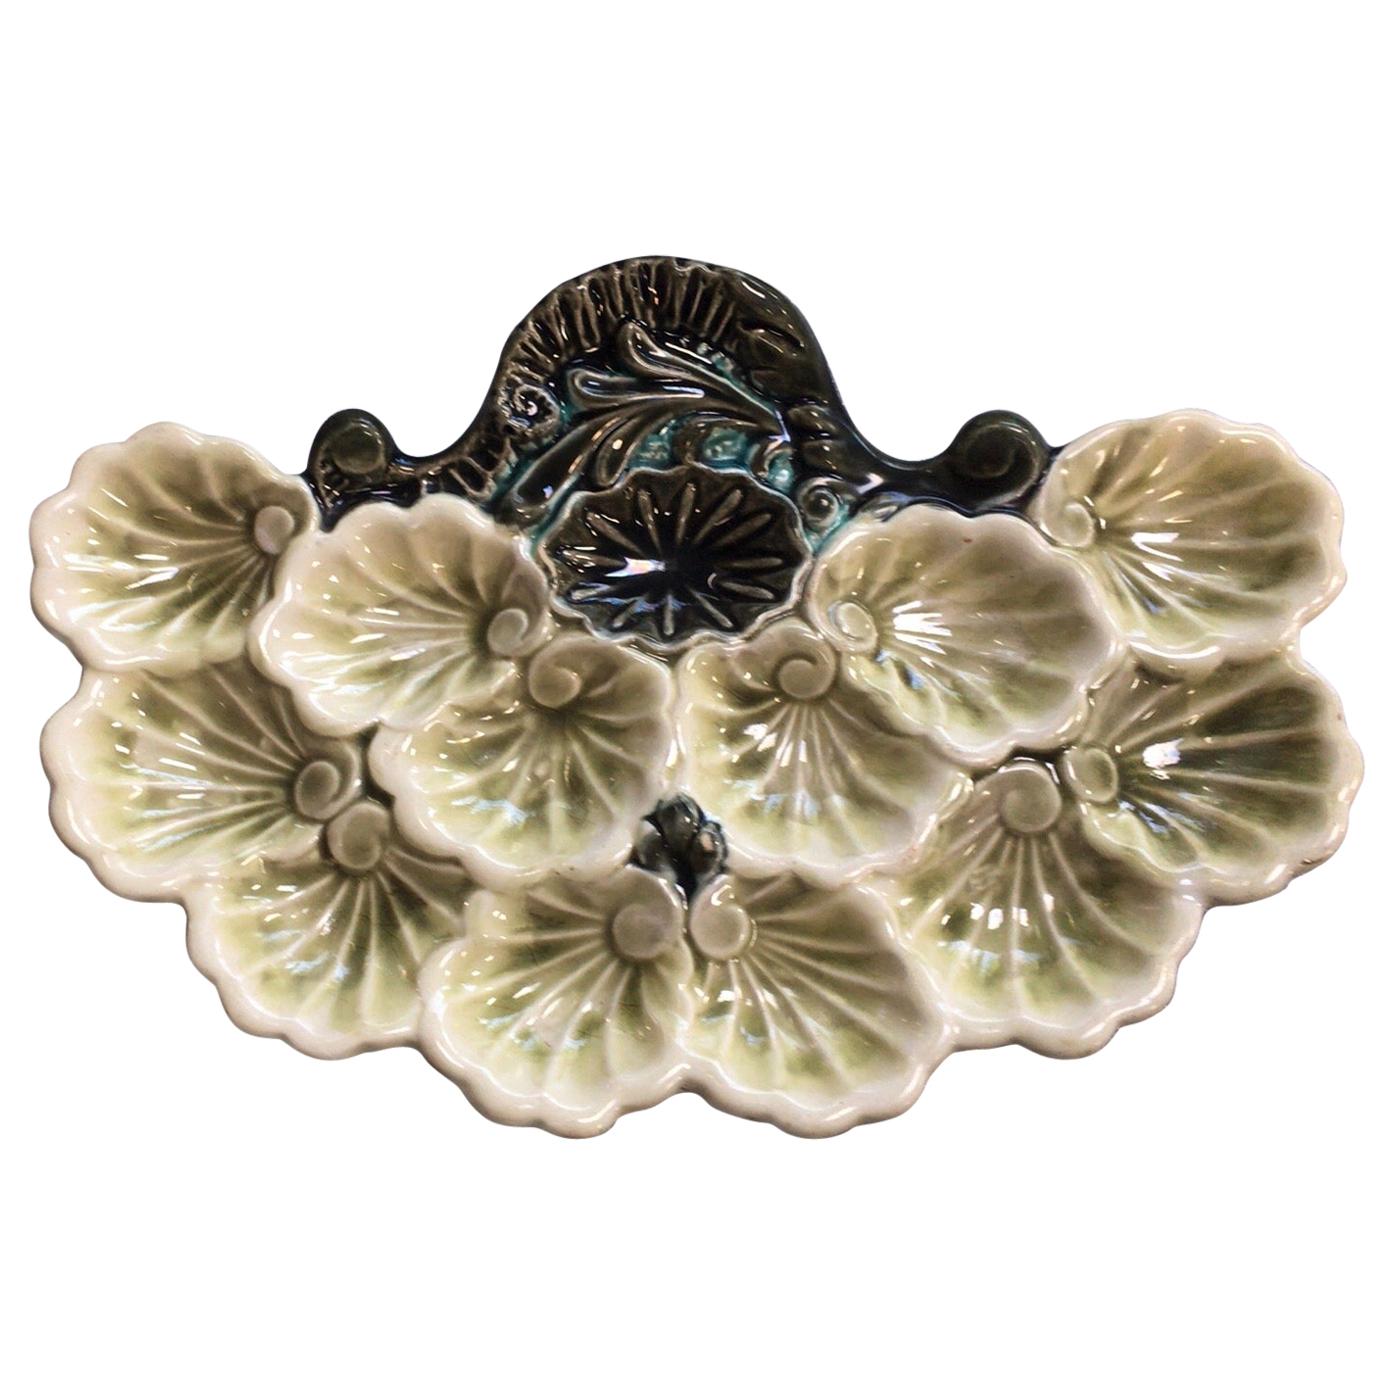 Rare French Majolica Oyster Platter Orchies, circa 1900